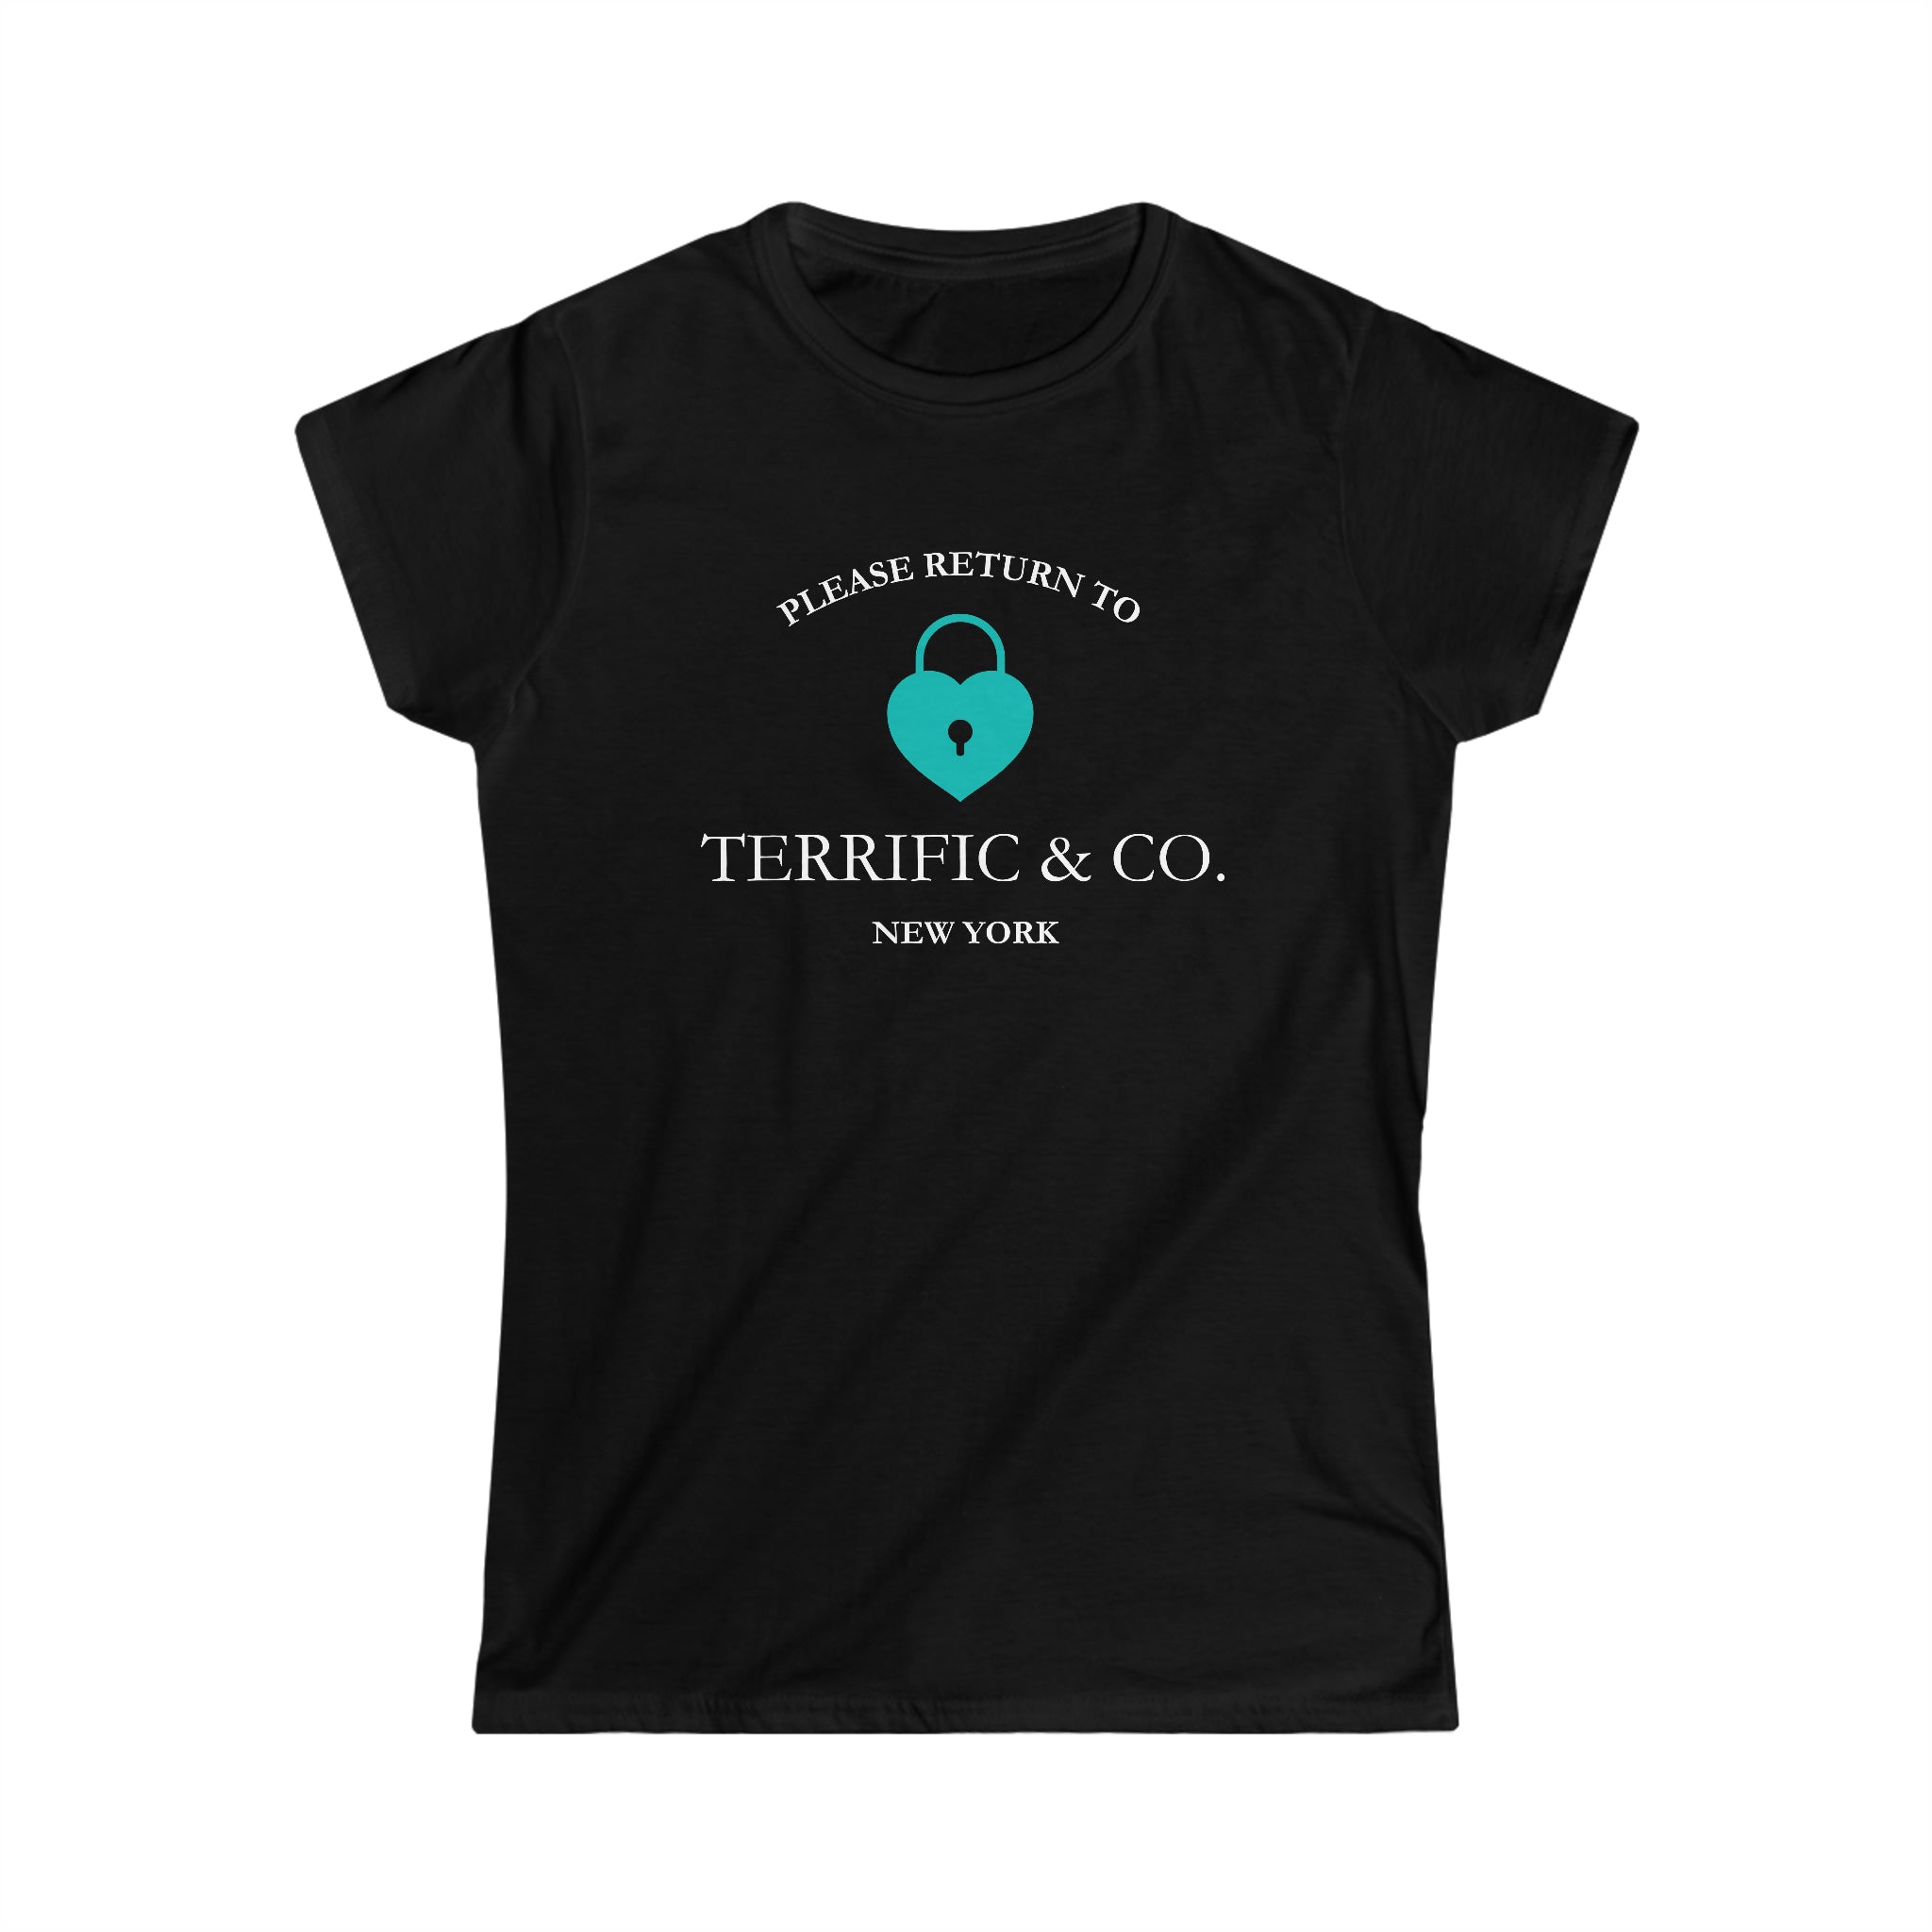 Please Return To Terrific and Co. (Lock) Designer inspired Women's Softstyle Tee, Women's Fashion Tshirt T-Shirt Black-2XL The Middle Aged Groove